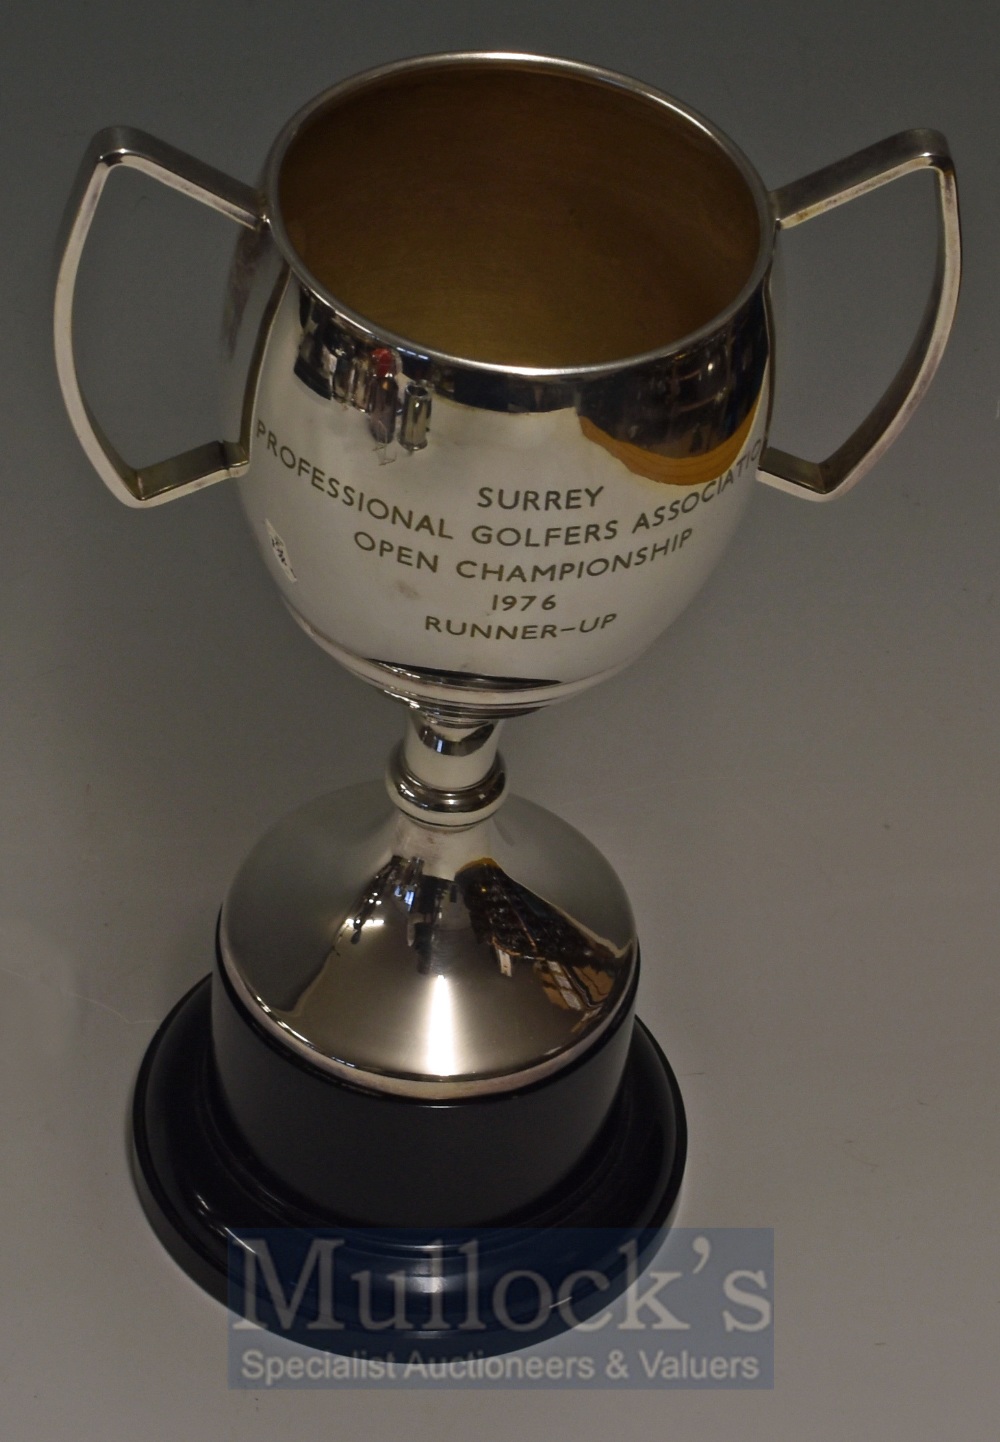 Selection of Golf Presentation Tankards and Trophies - To include 1976 Surrey Professional Golfers